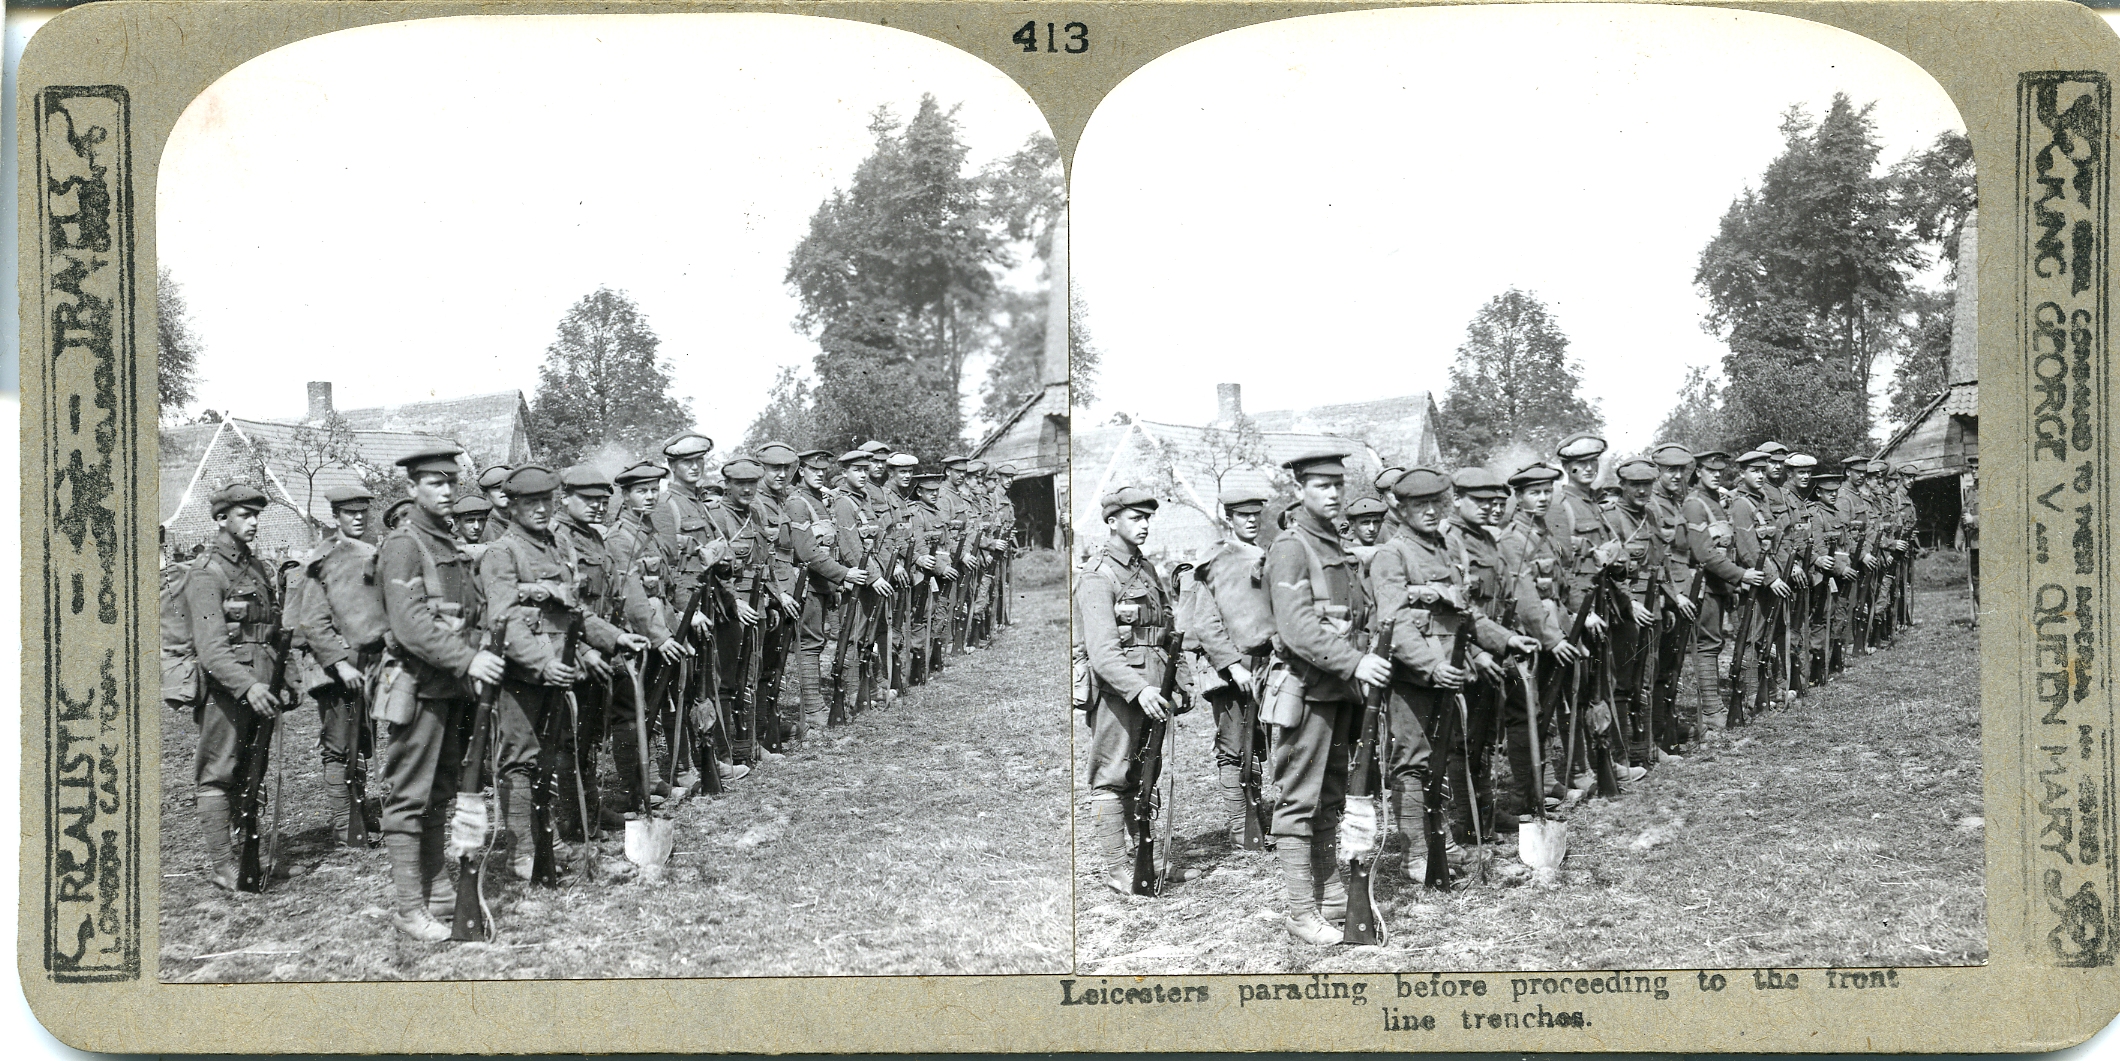 Leicesters parading before proceeding to the front line trenches